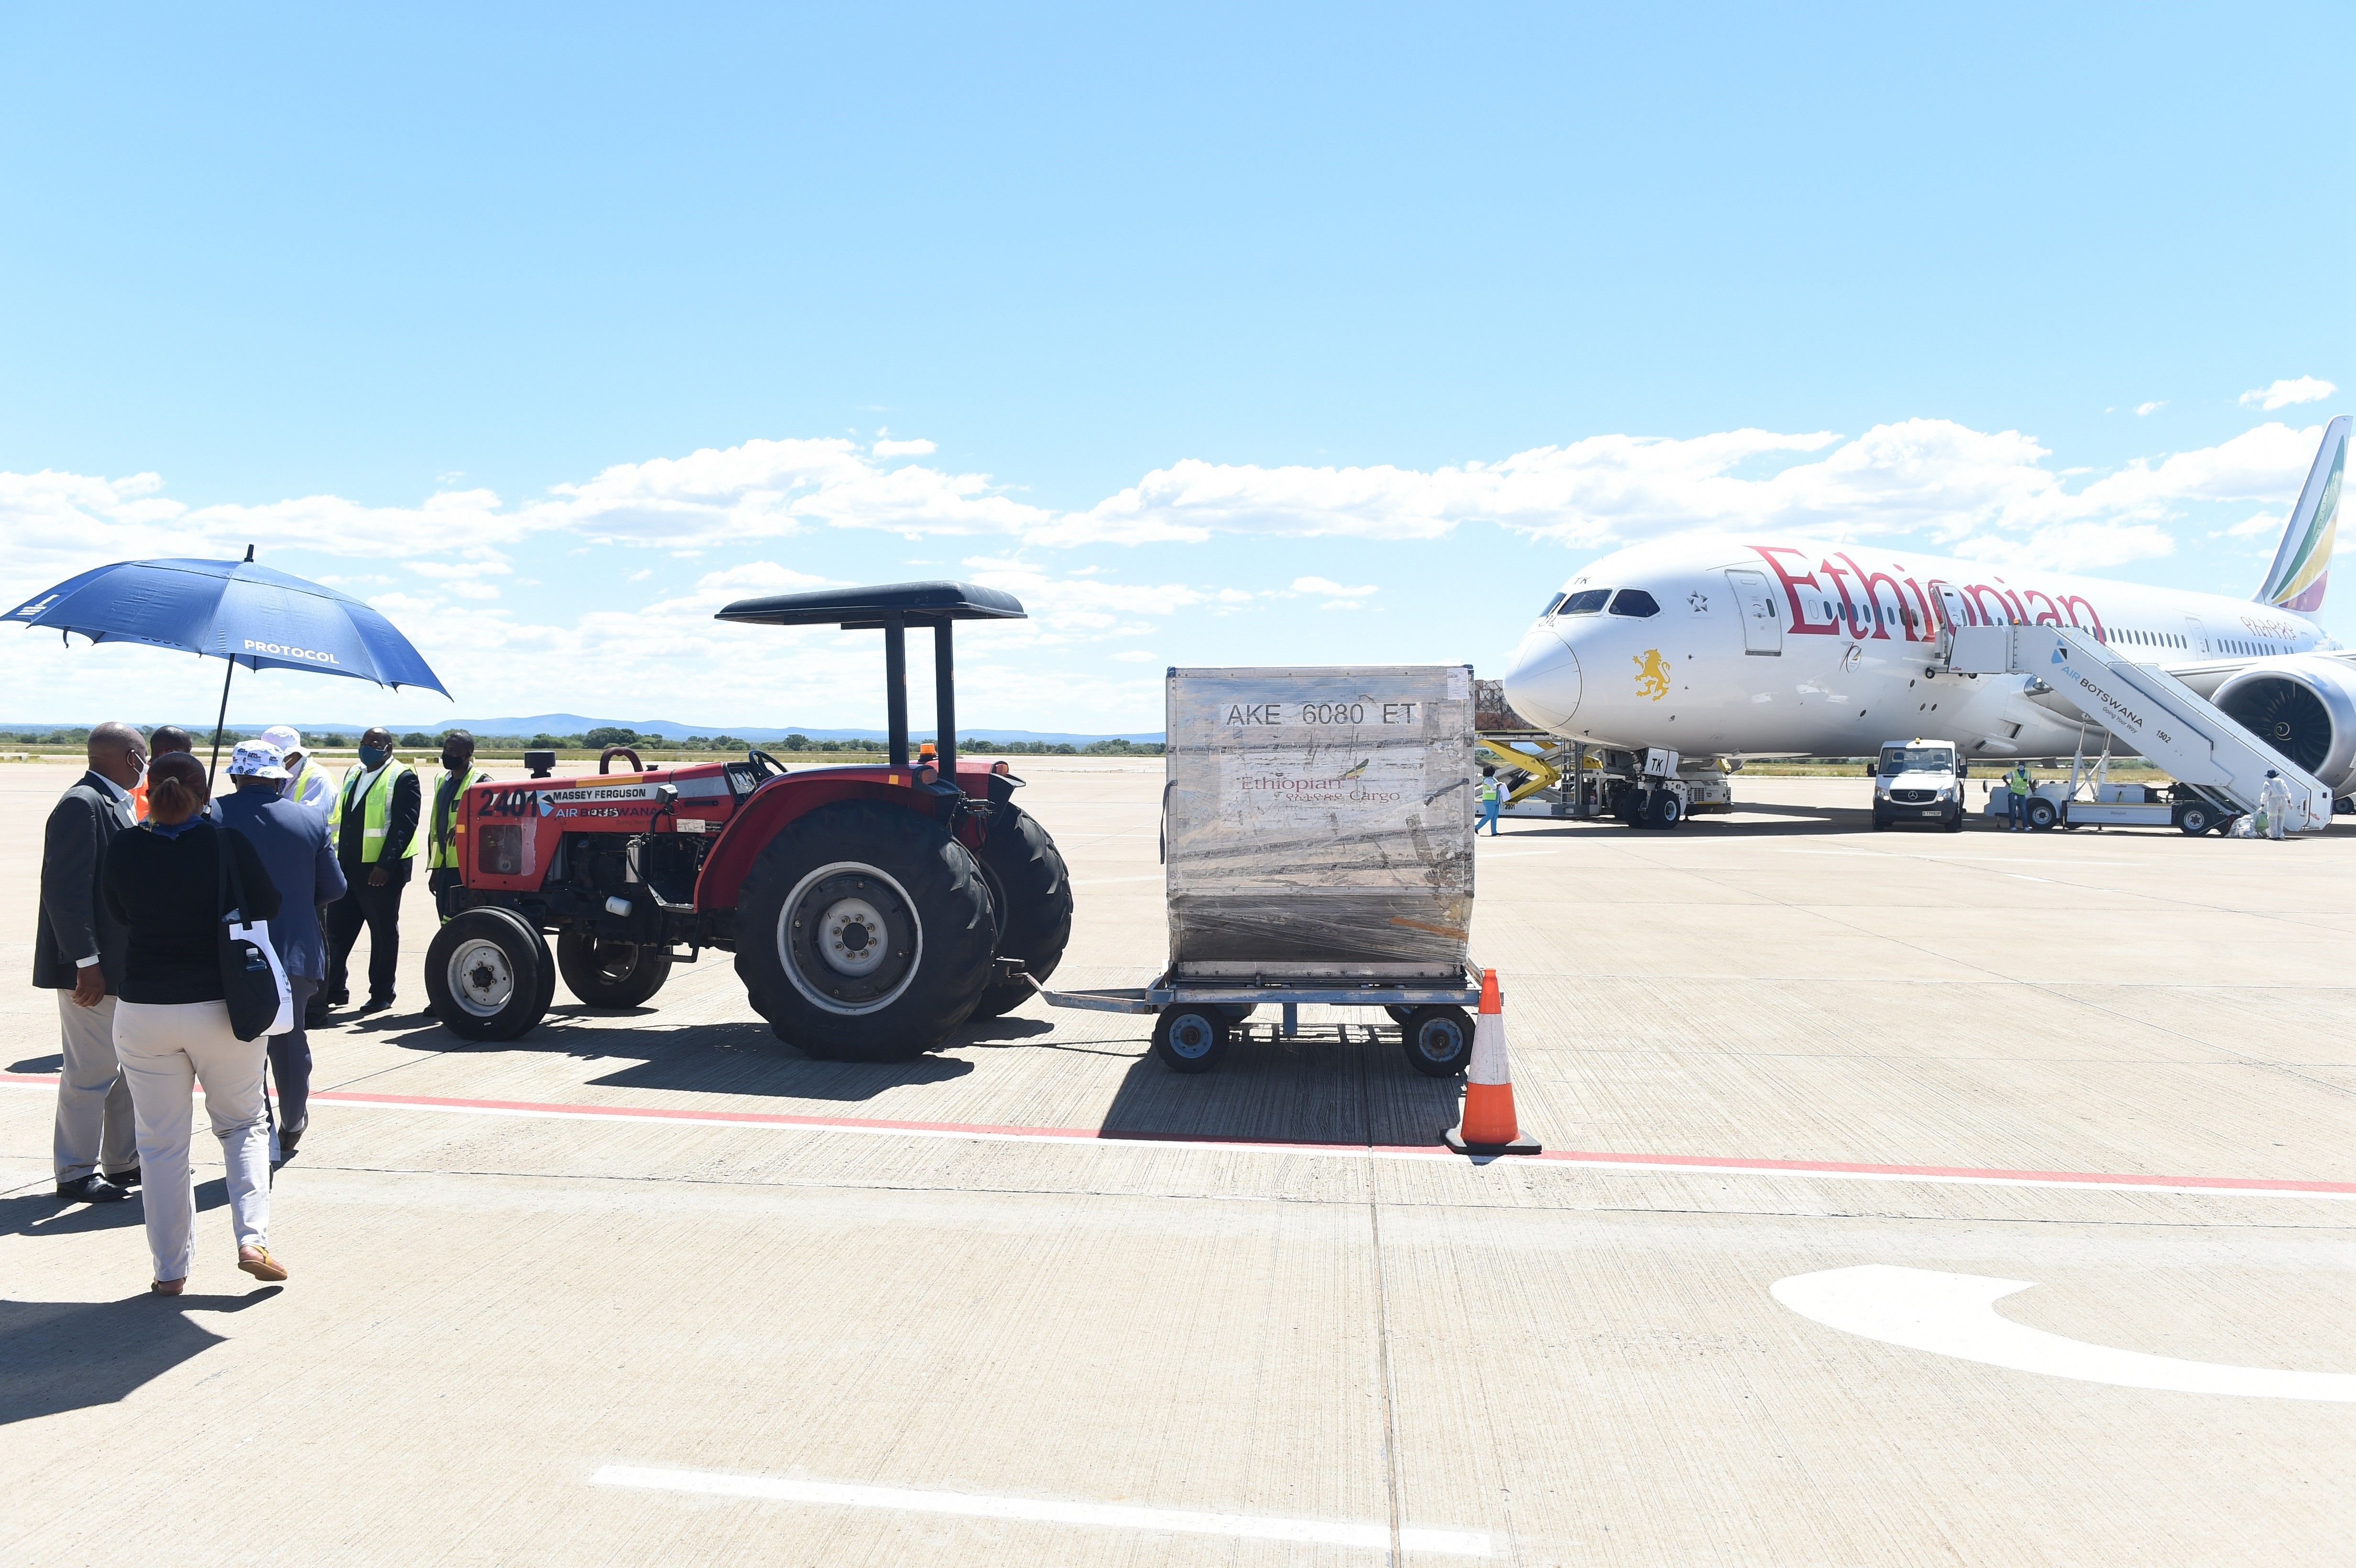 COVID-19 vaccines are unloaded from an Ethiopian aircraft at Sir Seretse Khama International Airport in Gaborone, Botswana, on March 27